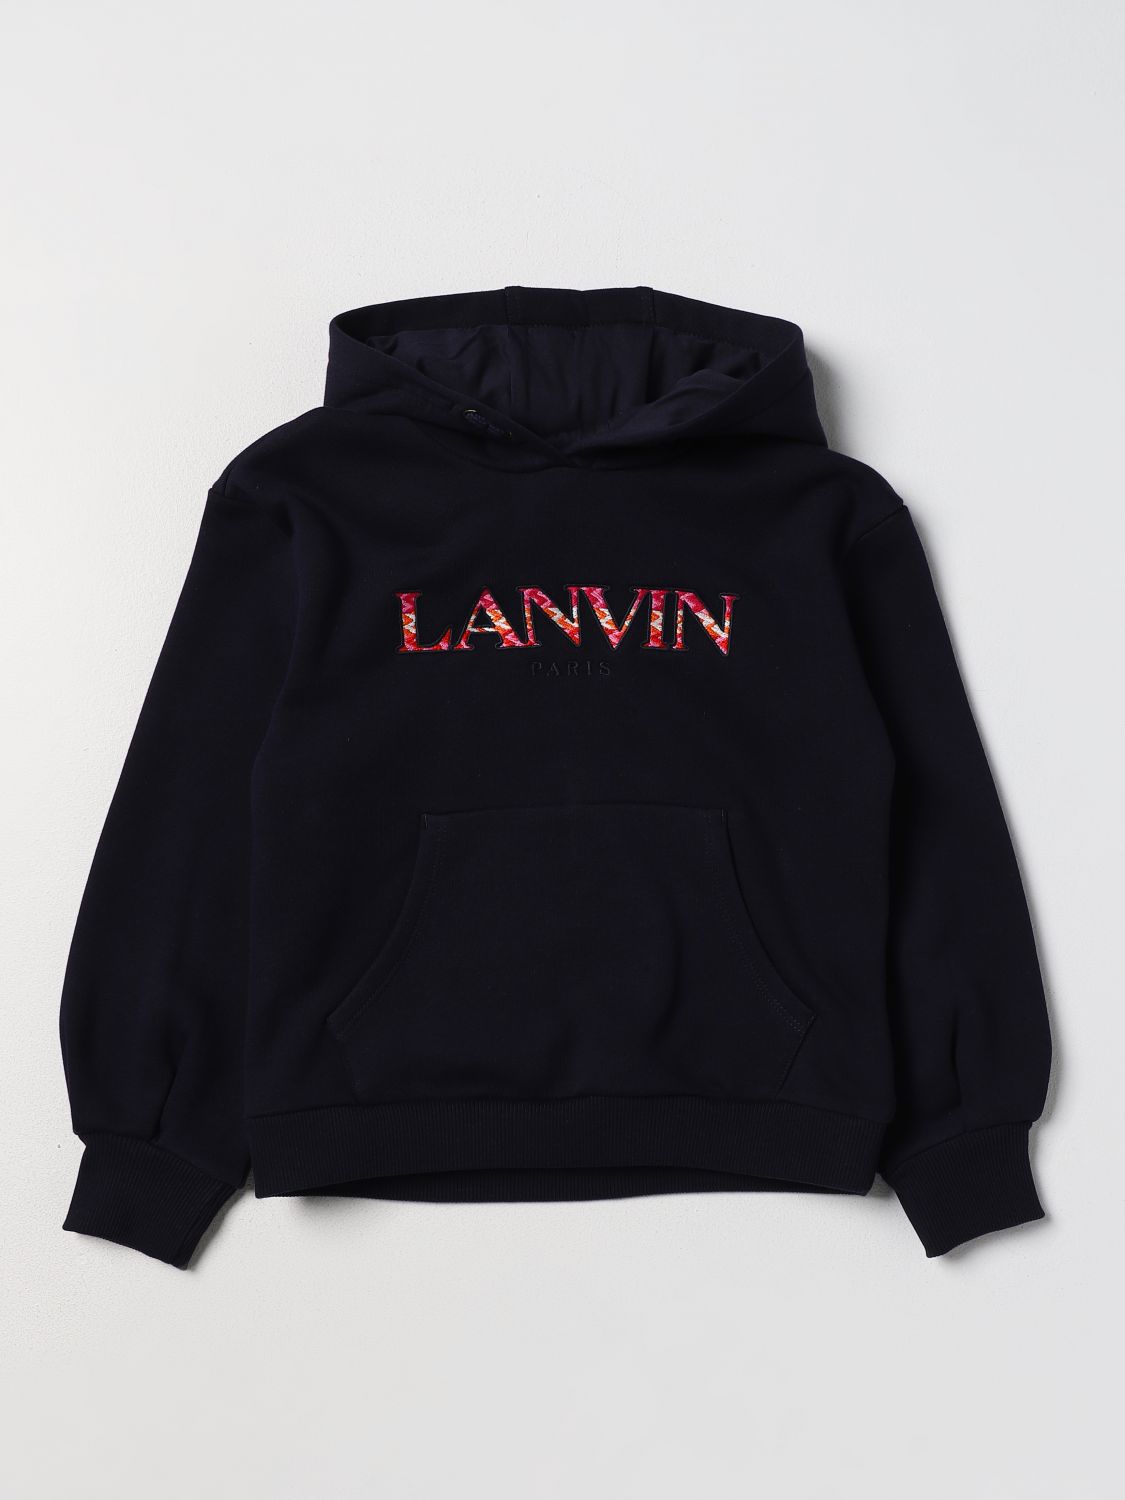 Lanvin Kids' Black Sweater With Logo For Boy In Marine